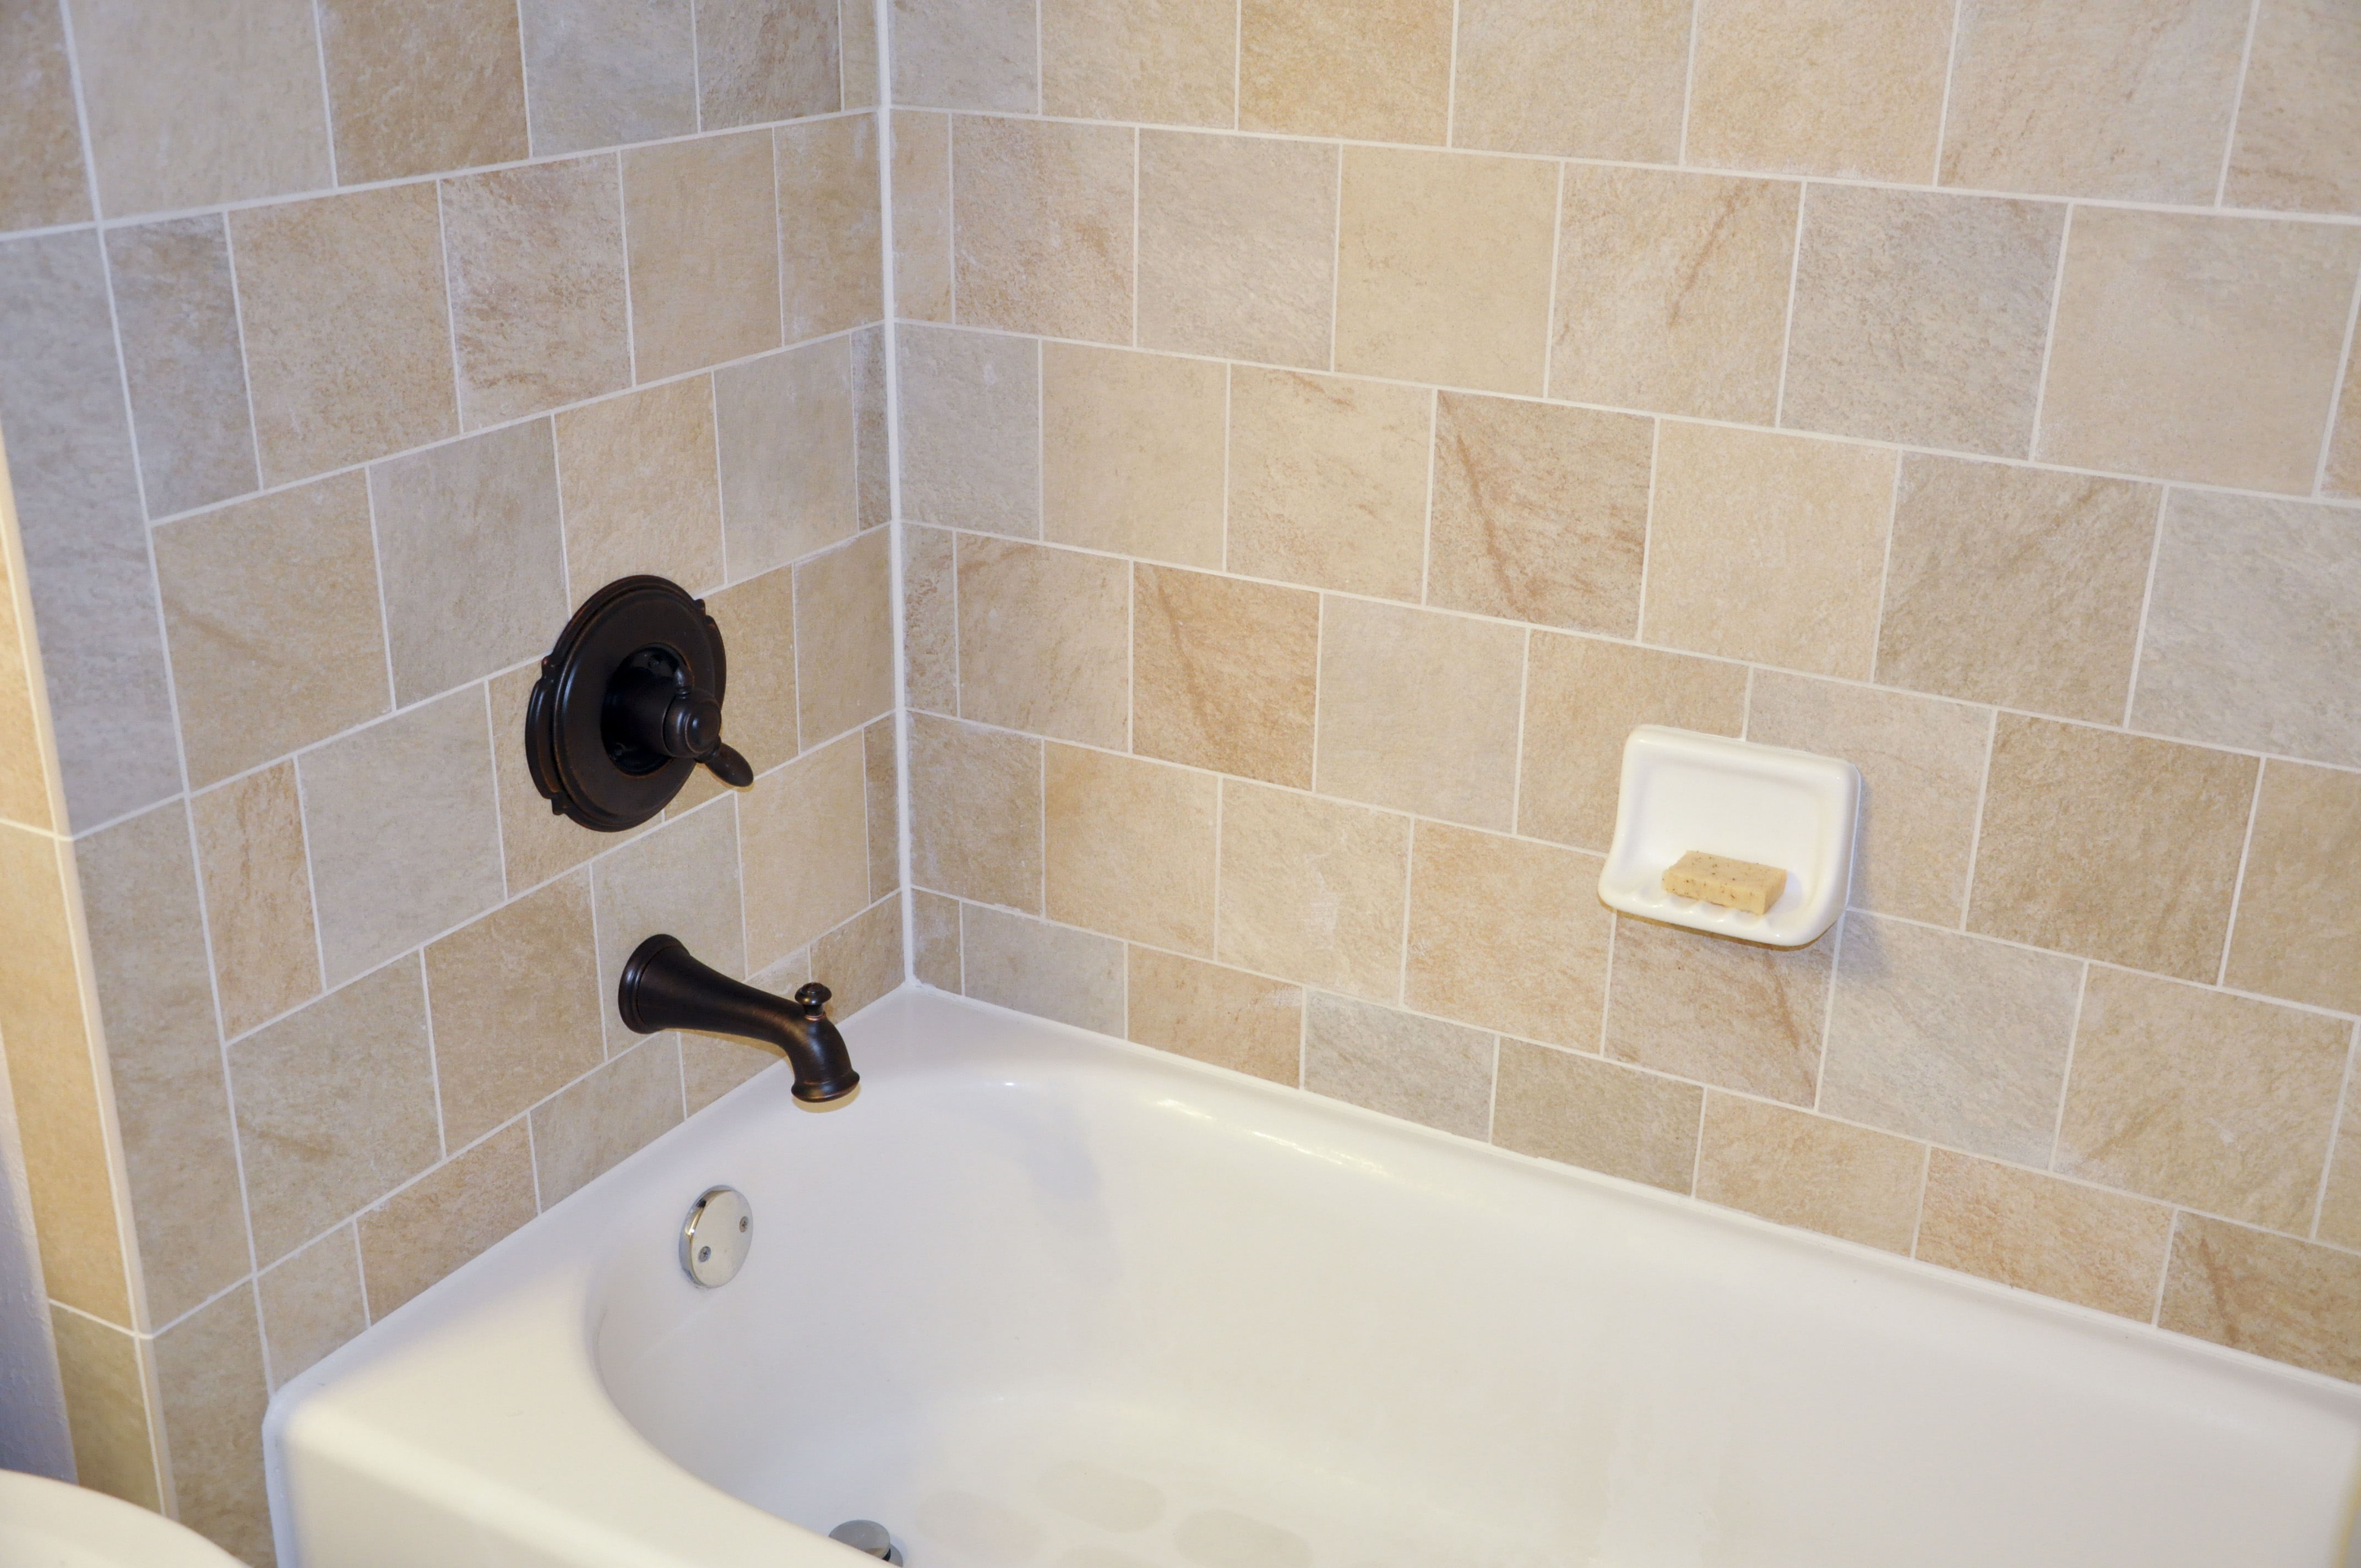 Bathroom Cleaning: How to Remove Mold From Caulk the Easy ...